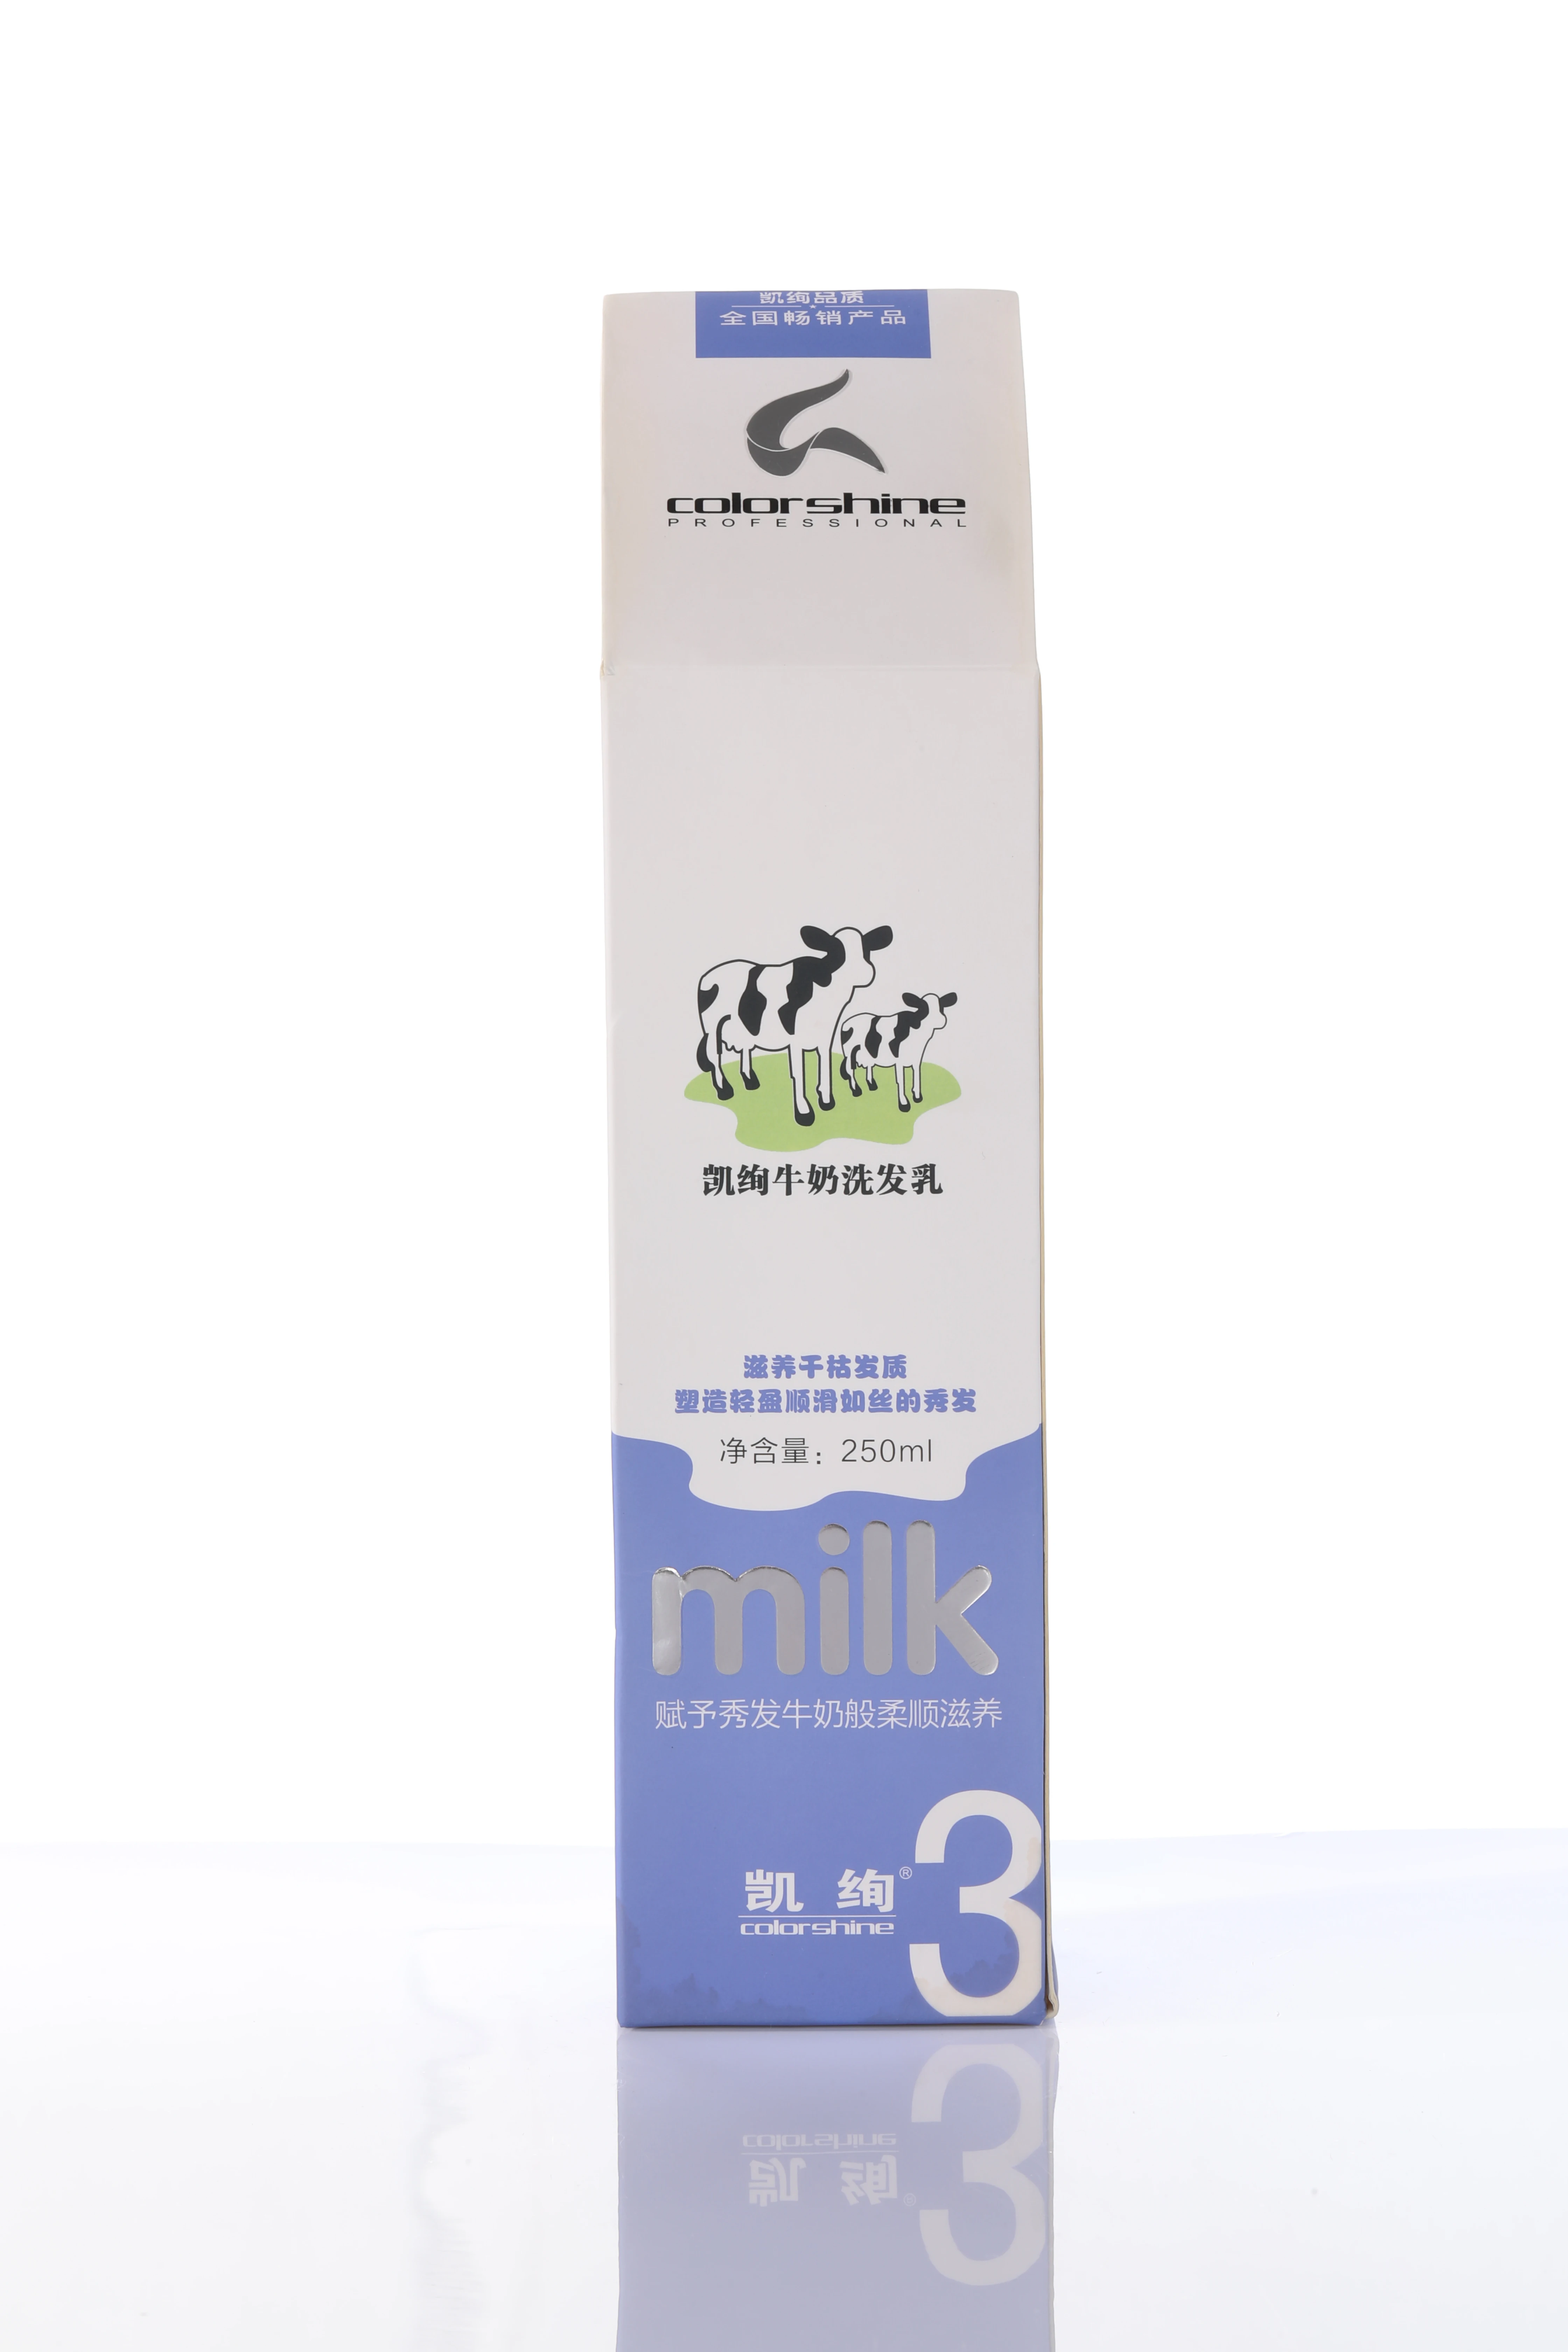 

KAIXUAN 250ml spa for hair natural manufacturing professional hairdressing products high-tech formula milk shampoo